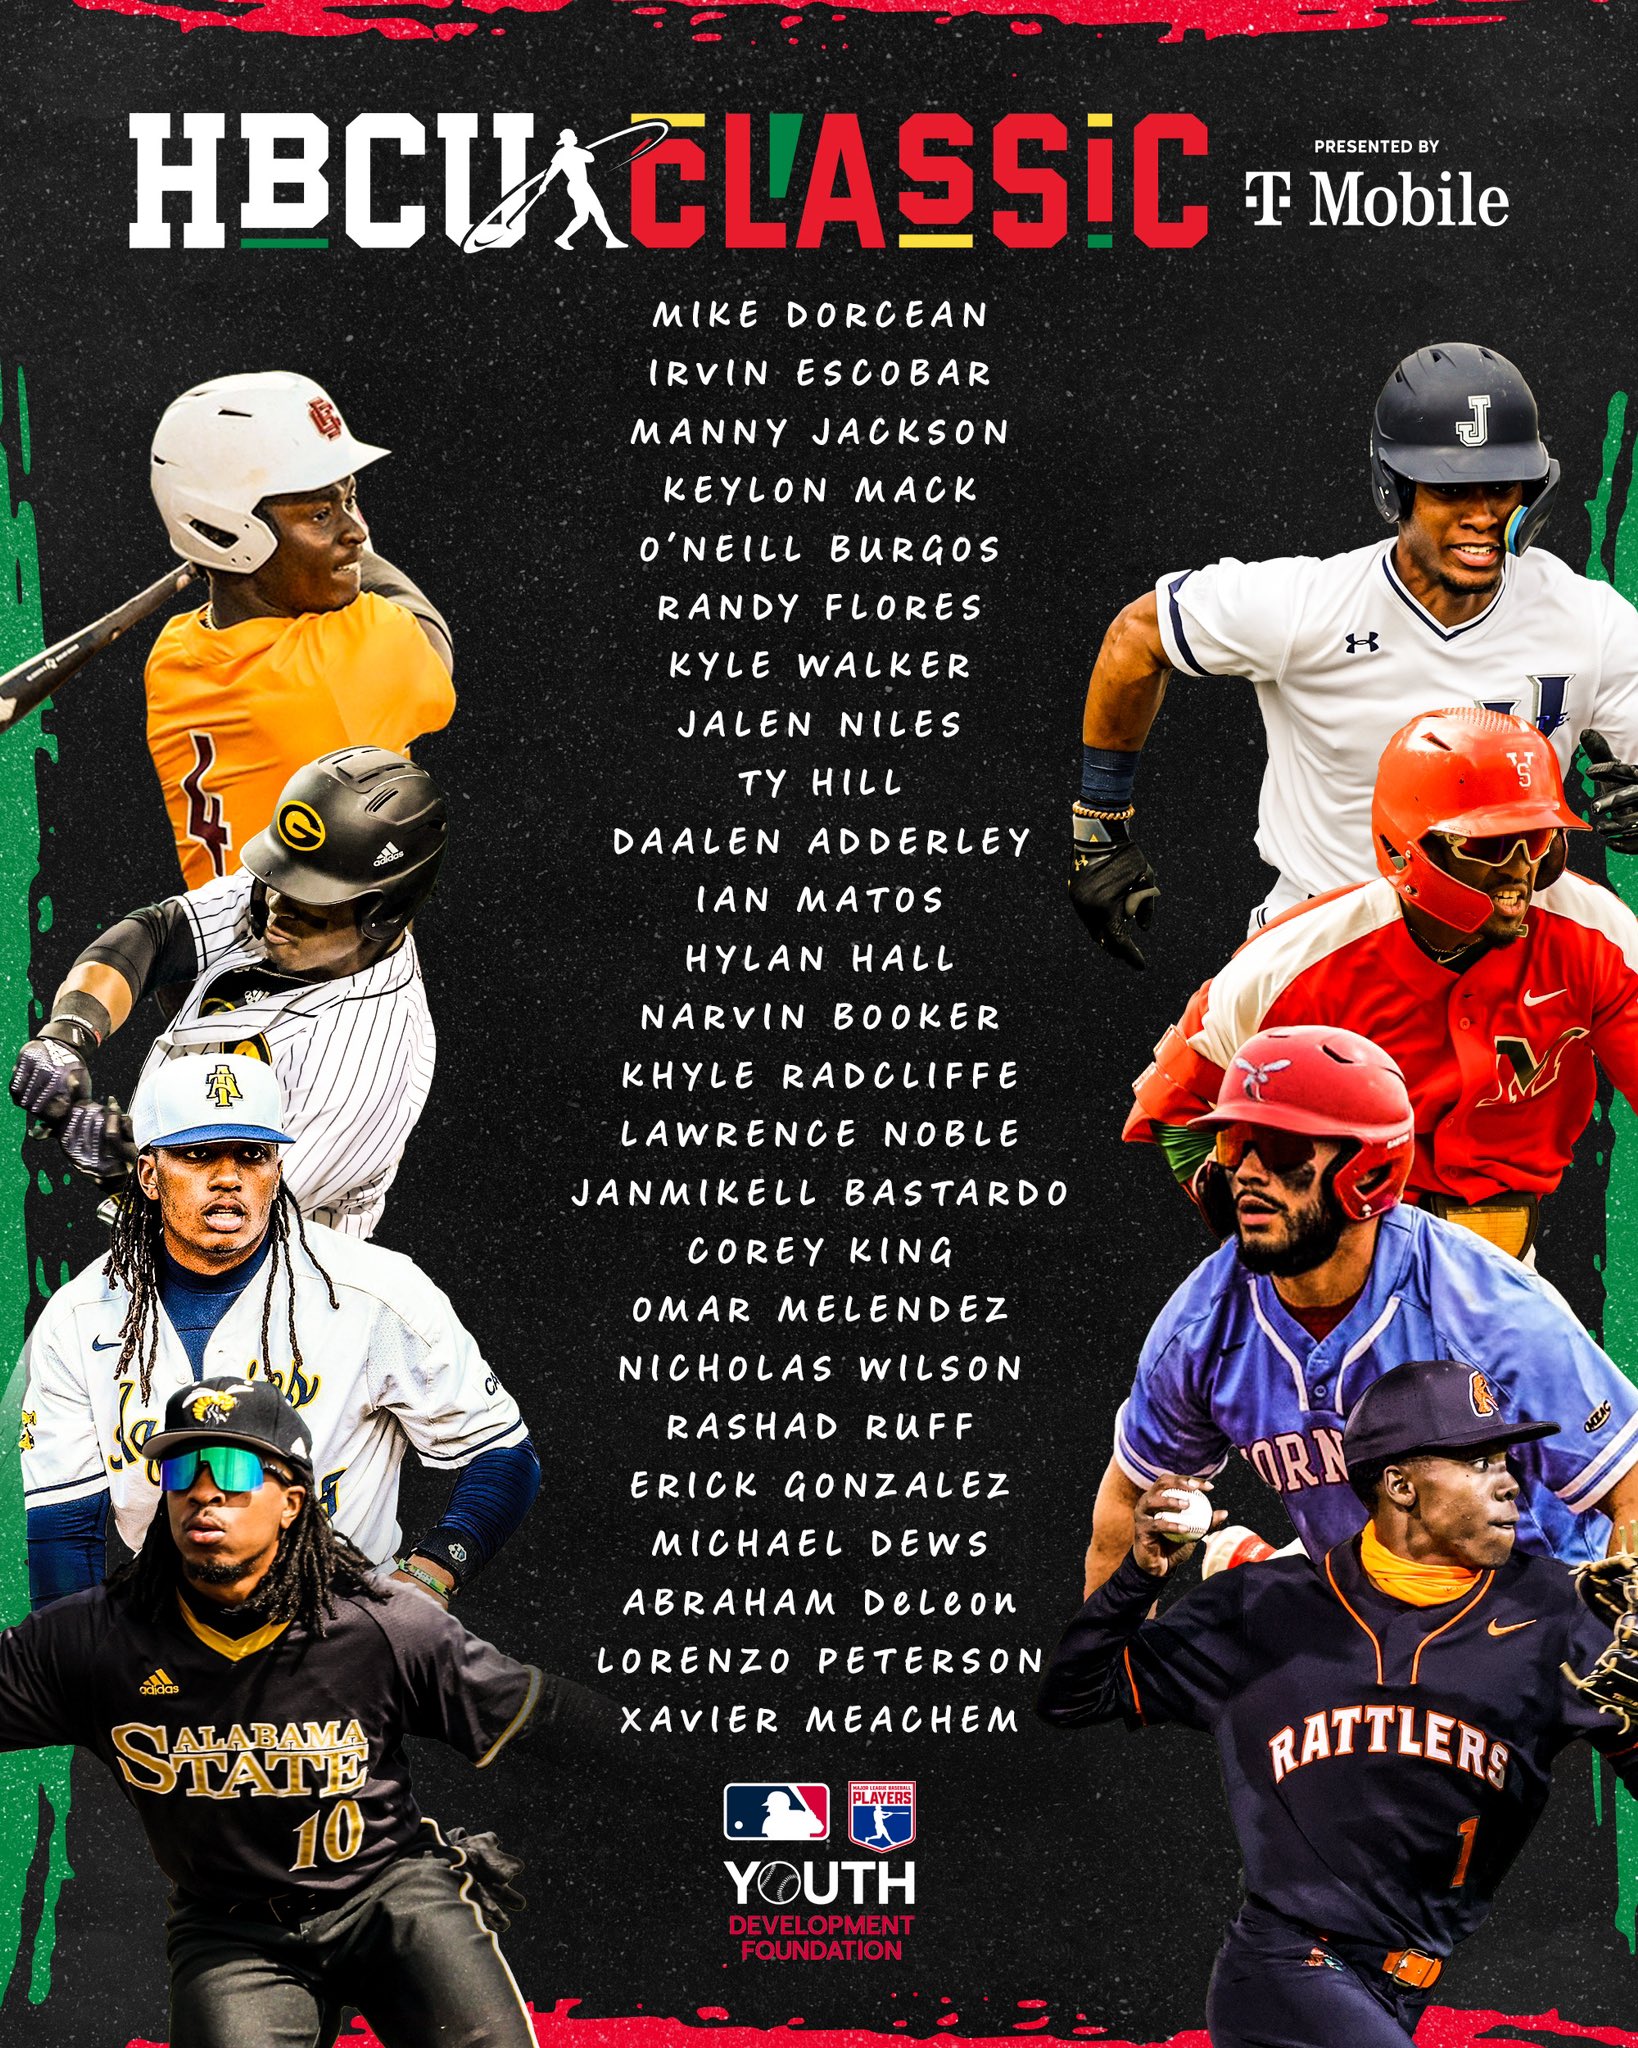 MLBDevelops on Twitter "Introducing the roster for the inaugural HBCU